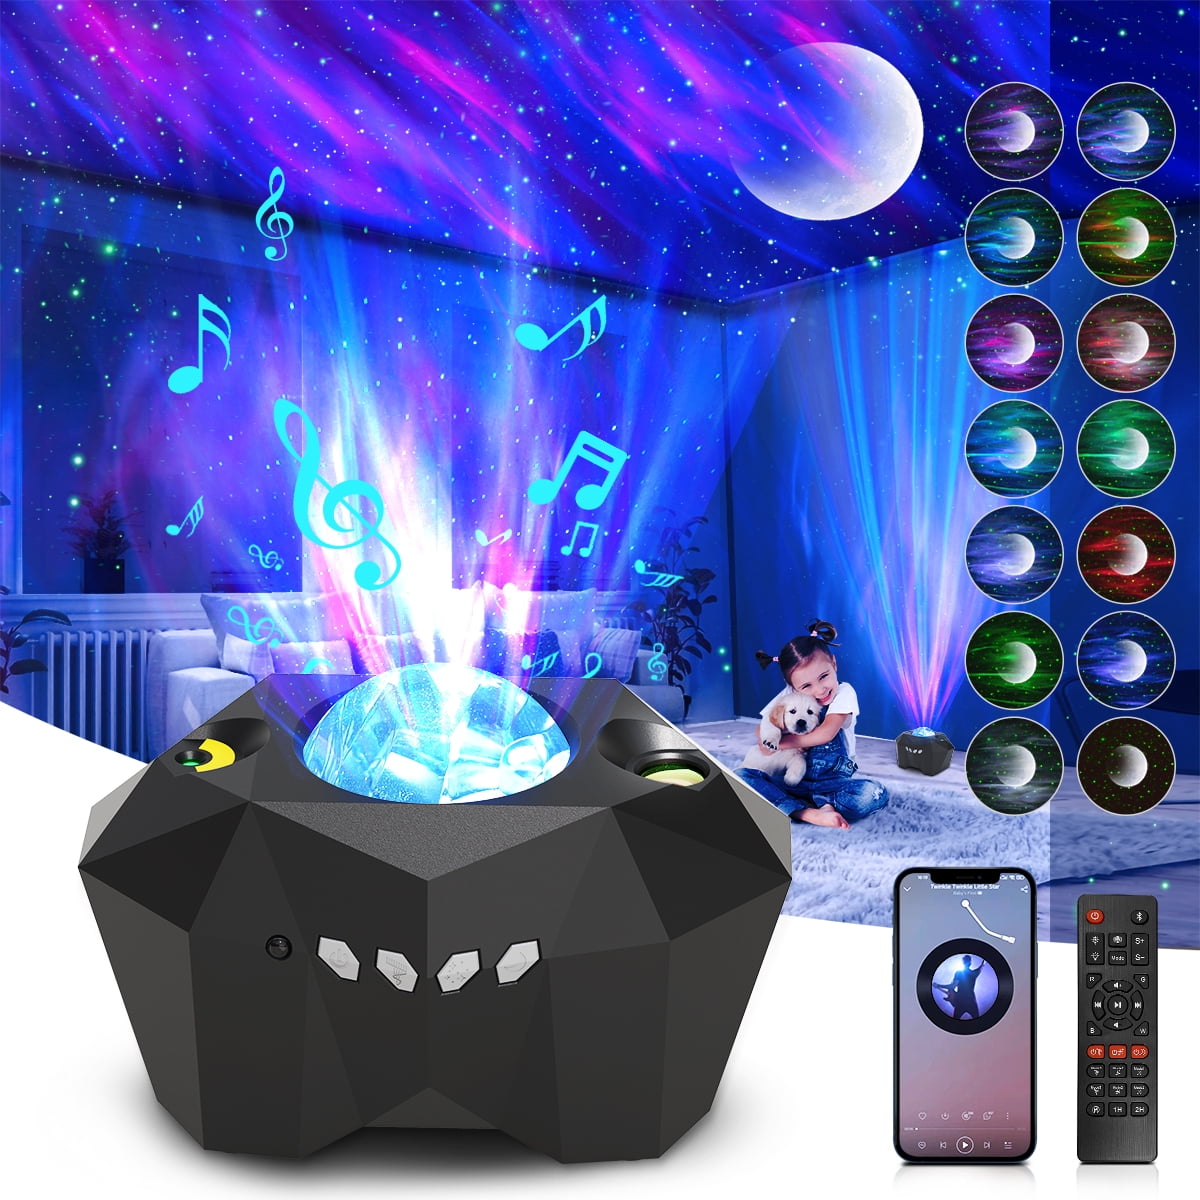 Music Speaker Light Show with Sound Activated for Kids Adults Theatre Room Home Decoration-2020UPGRADED Star Projector,Delicacy Galaxy Projector Aurora Light Starry Sky Night Light Projector